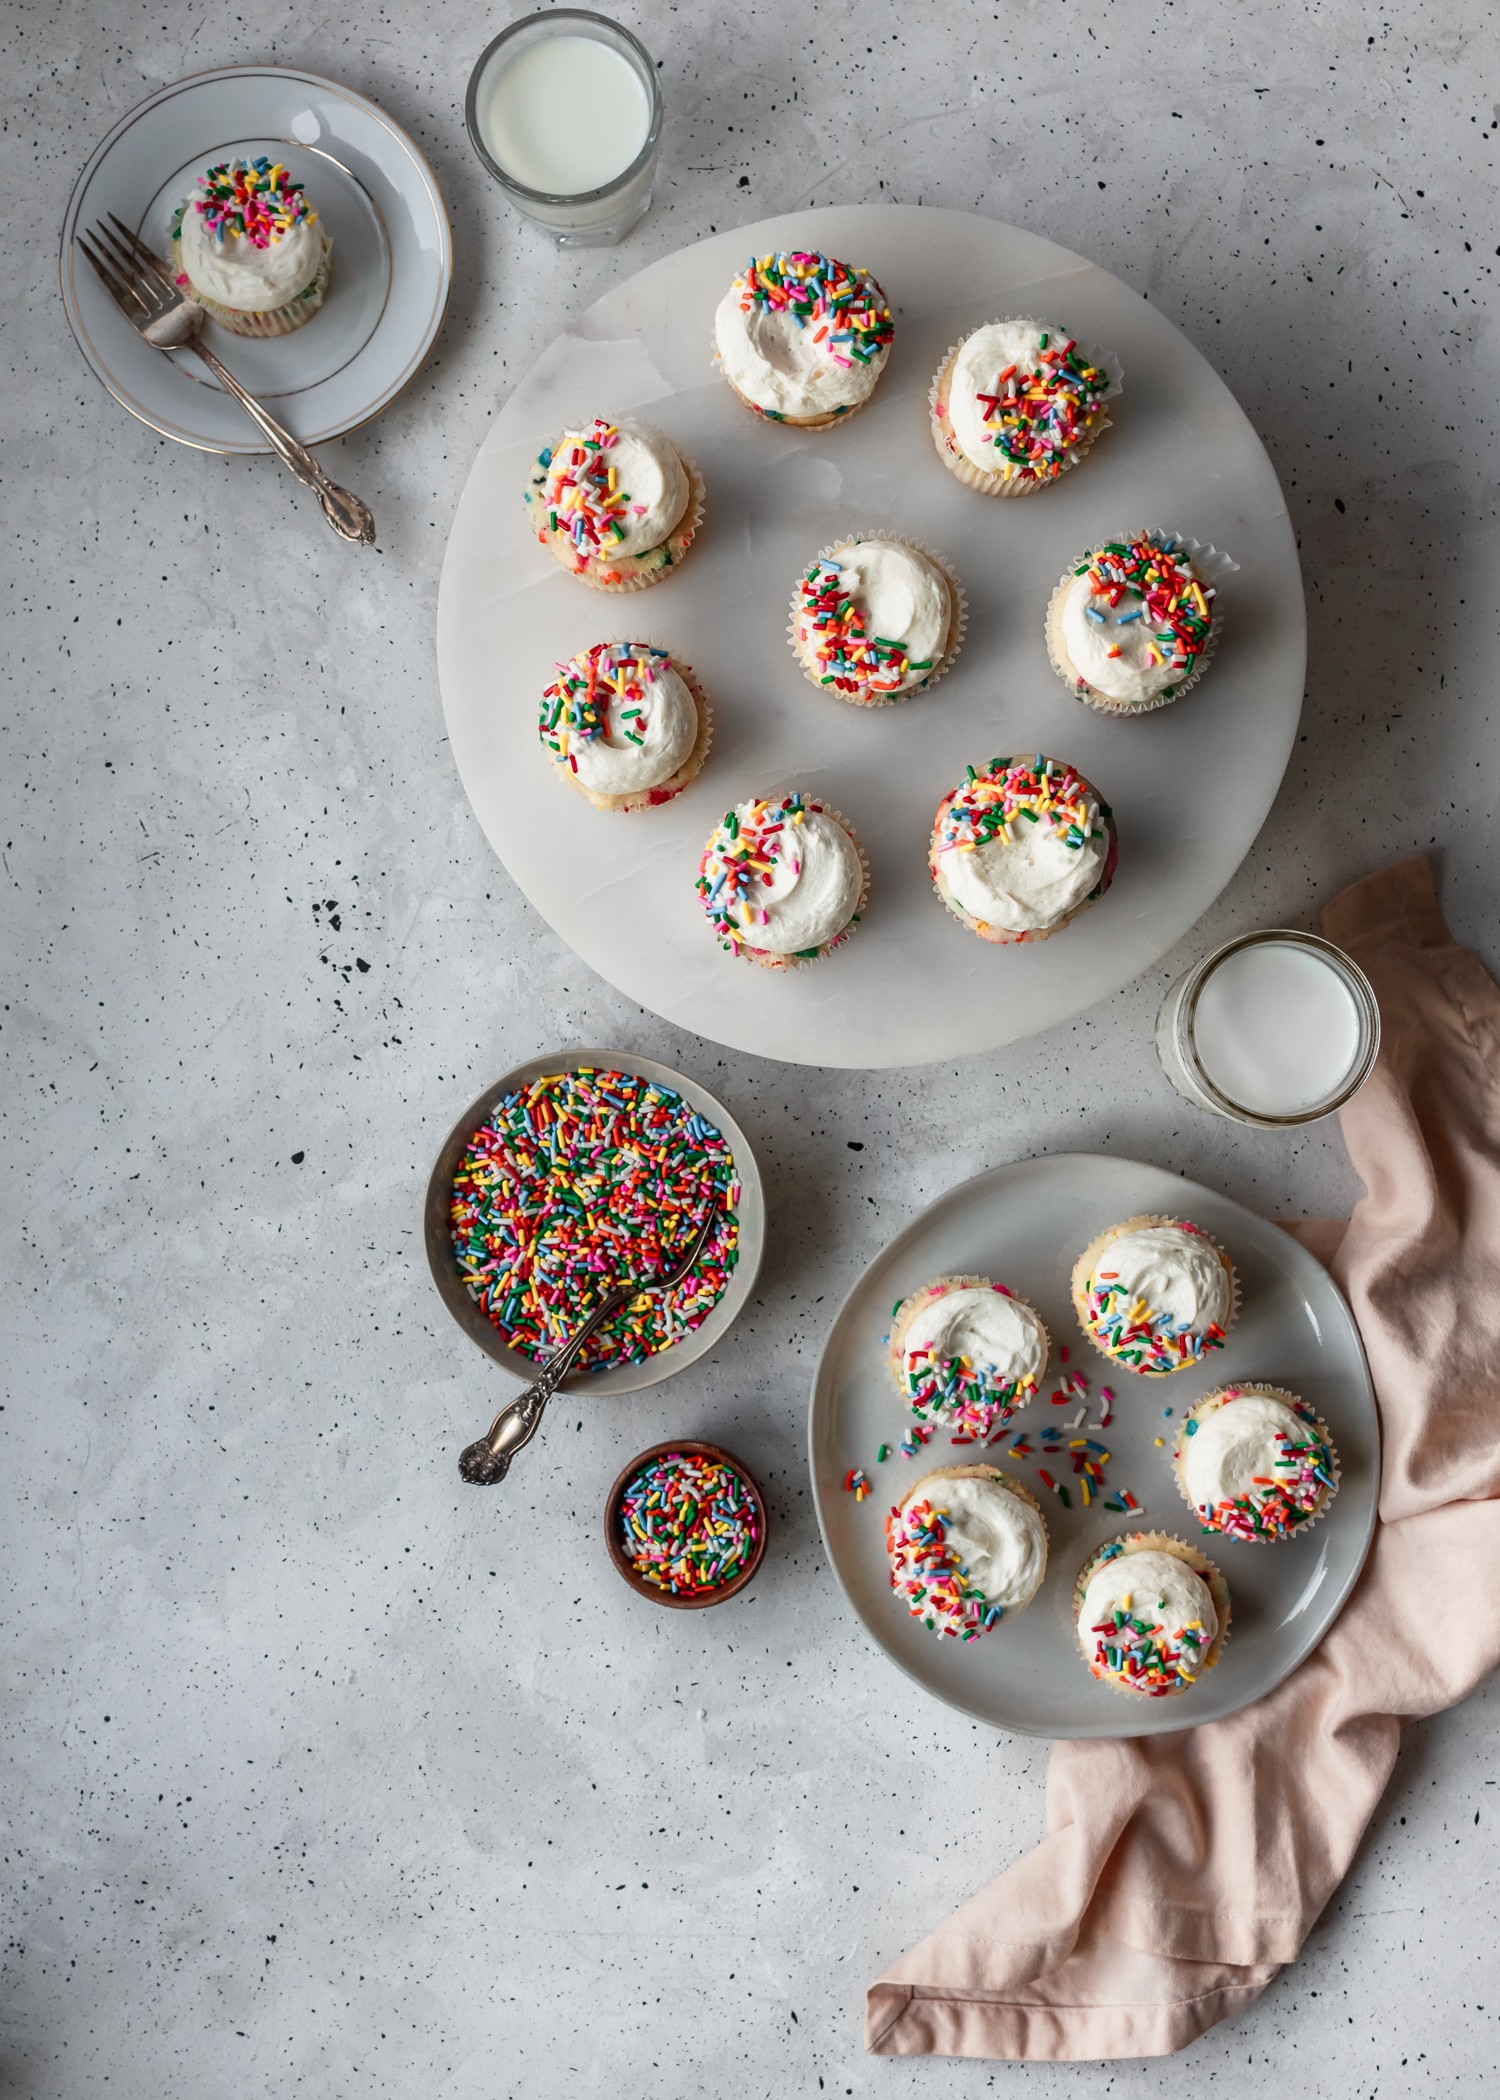 An overhead shot of sprinkle cakes on various white plates, surrounded by glasses of milk and bowls of sprinkles on a grey table.